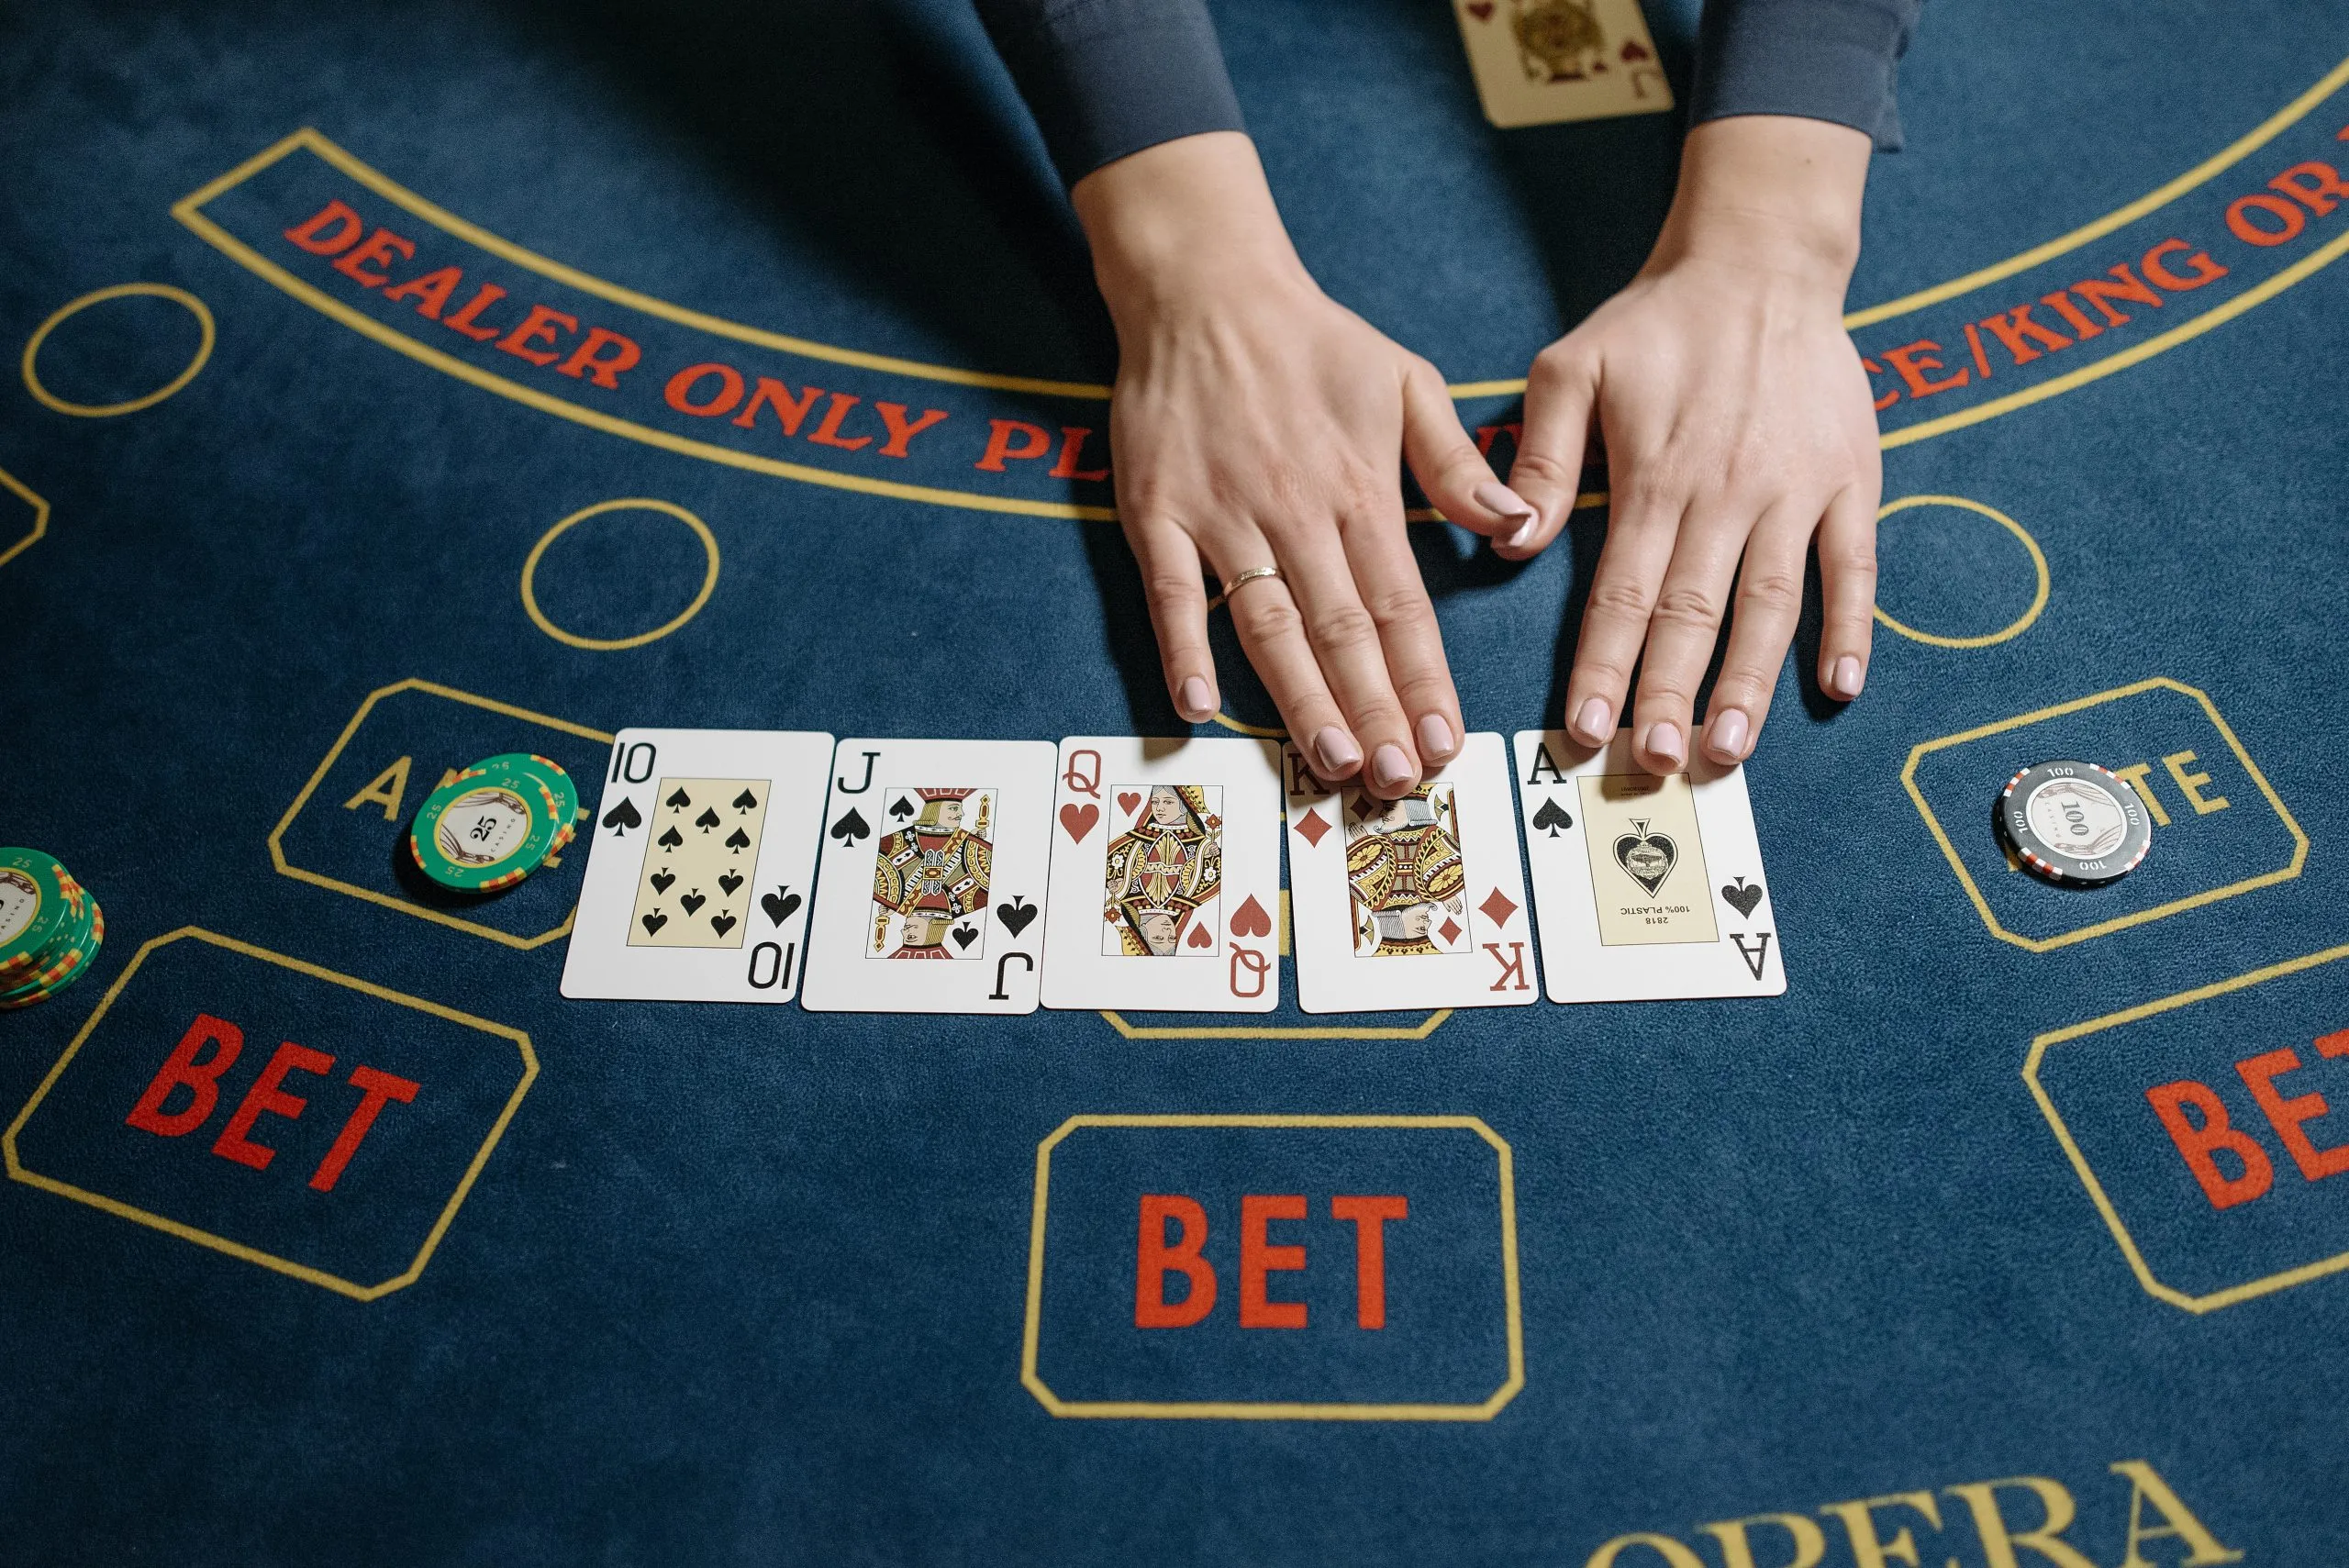 Debunking Online Casino Game Myths and Misconceptions